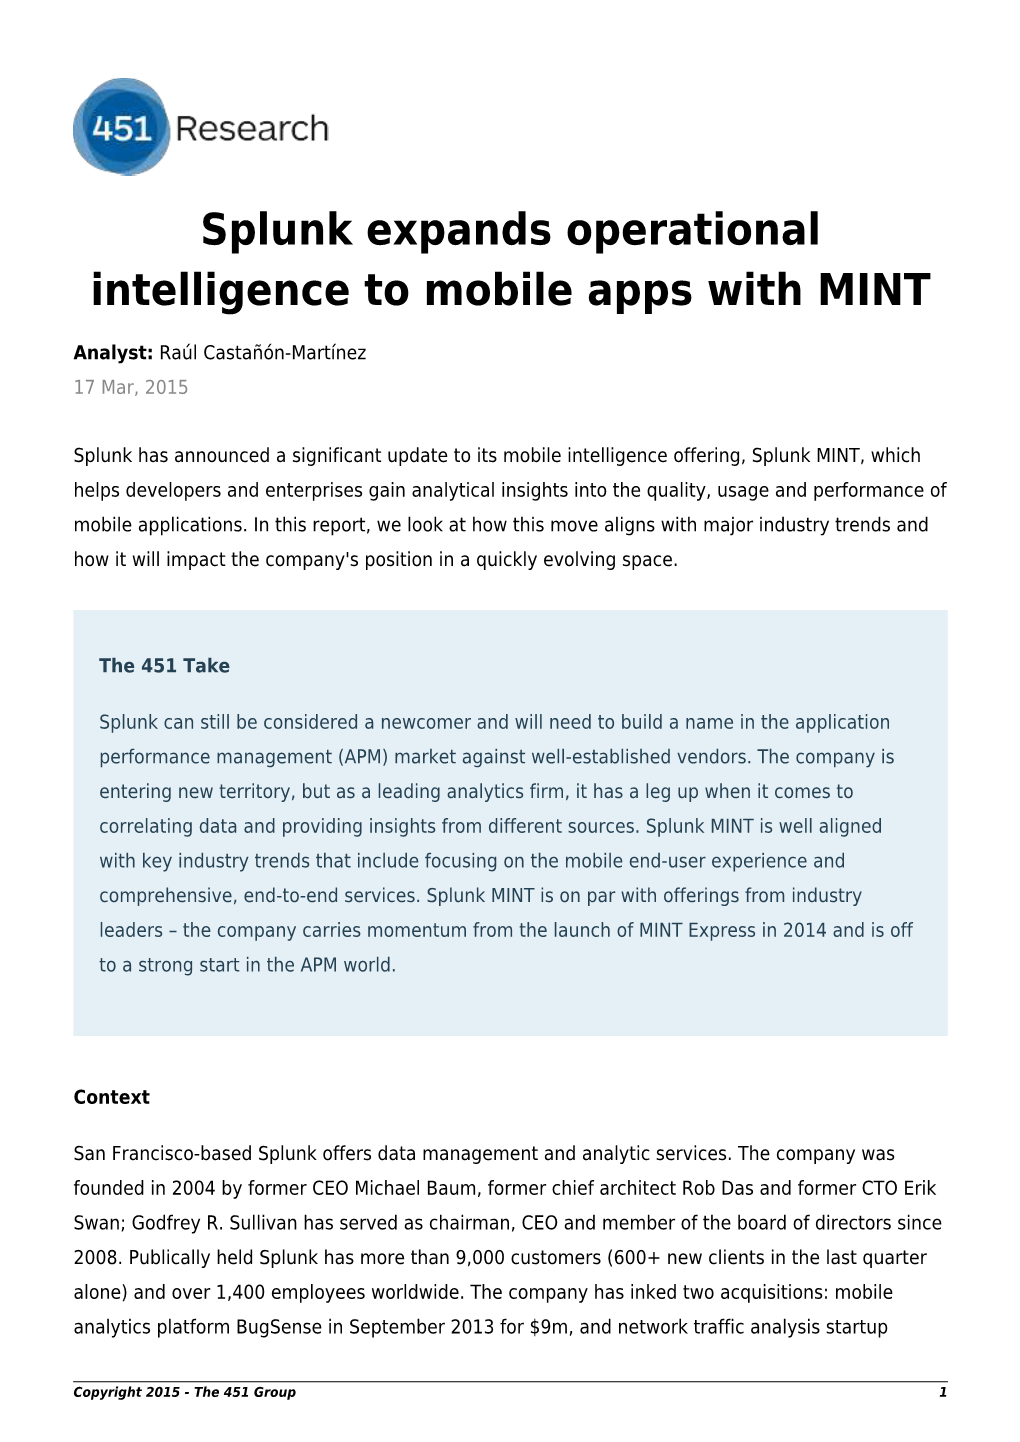 Splunk Expands Operational Intelligence to Mobile Apps with MINT